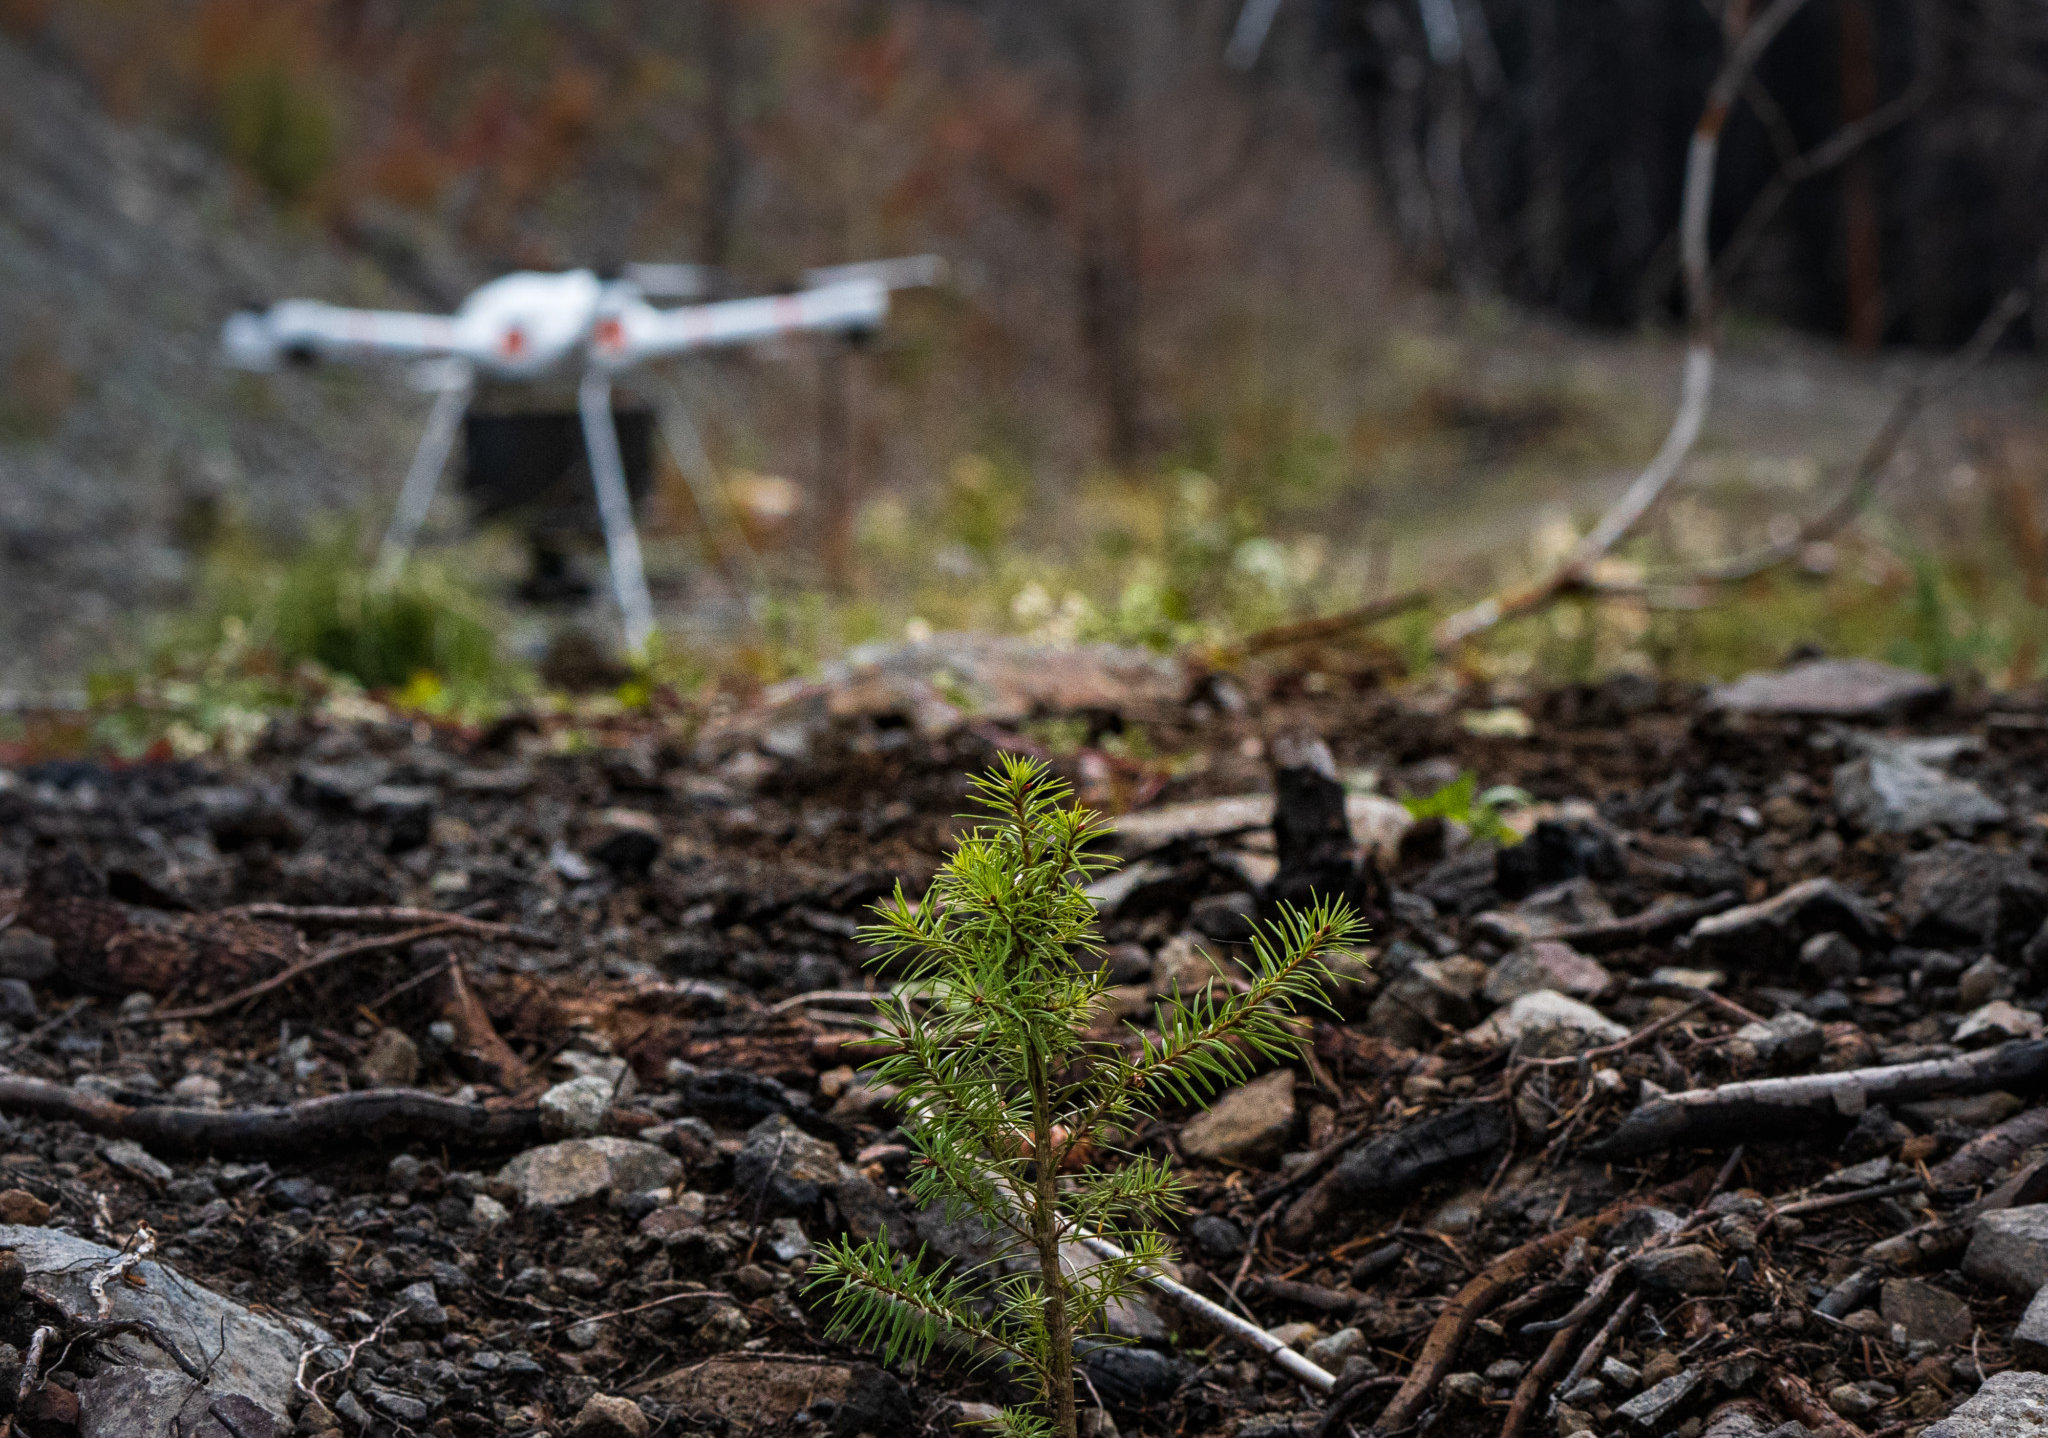 A aerial seeding drone rests on the forest floor beside some pine seedlings.